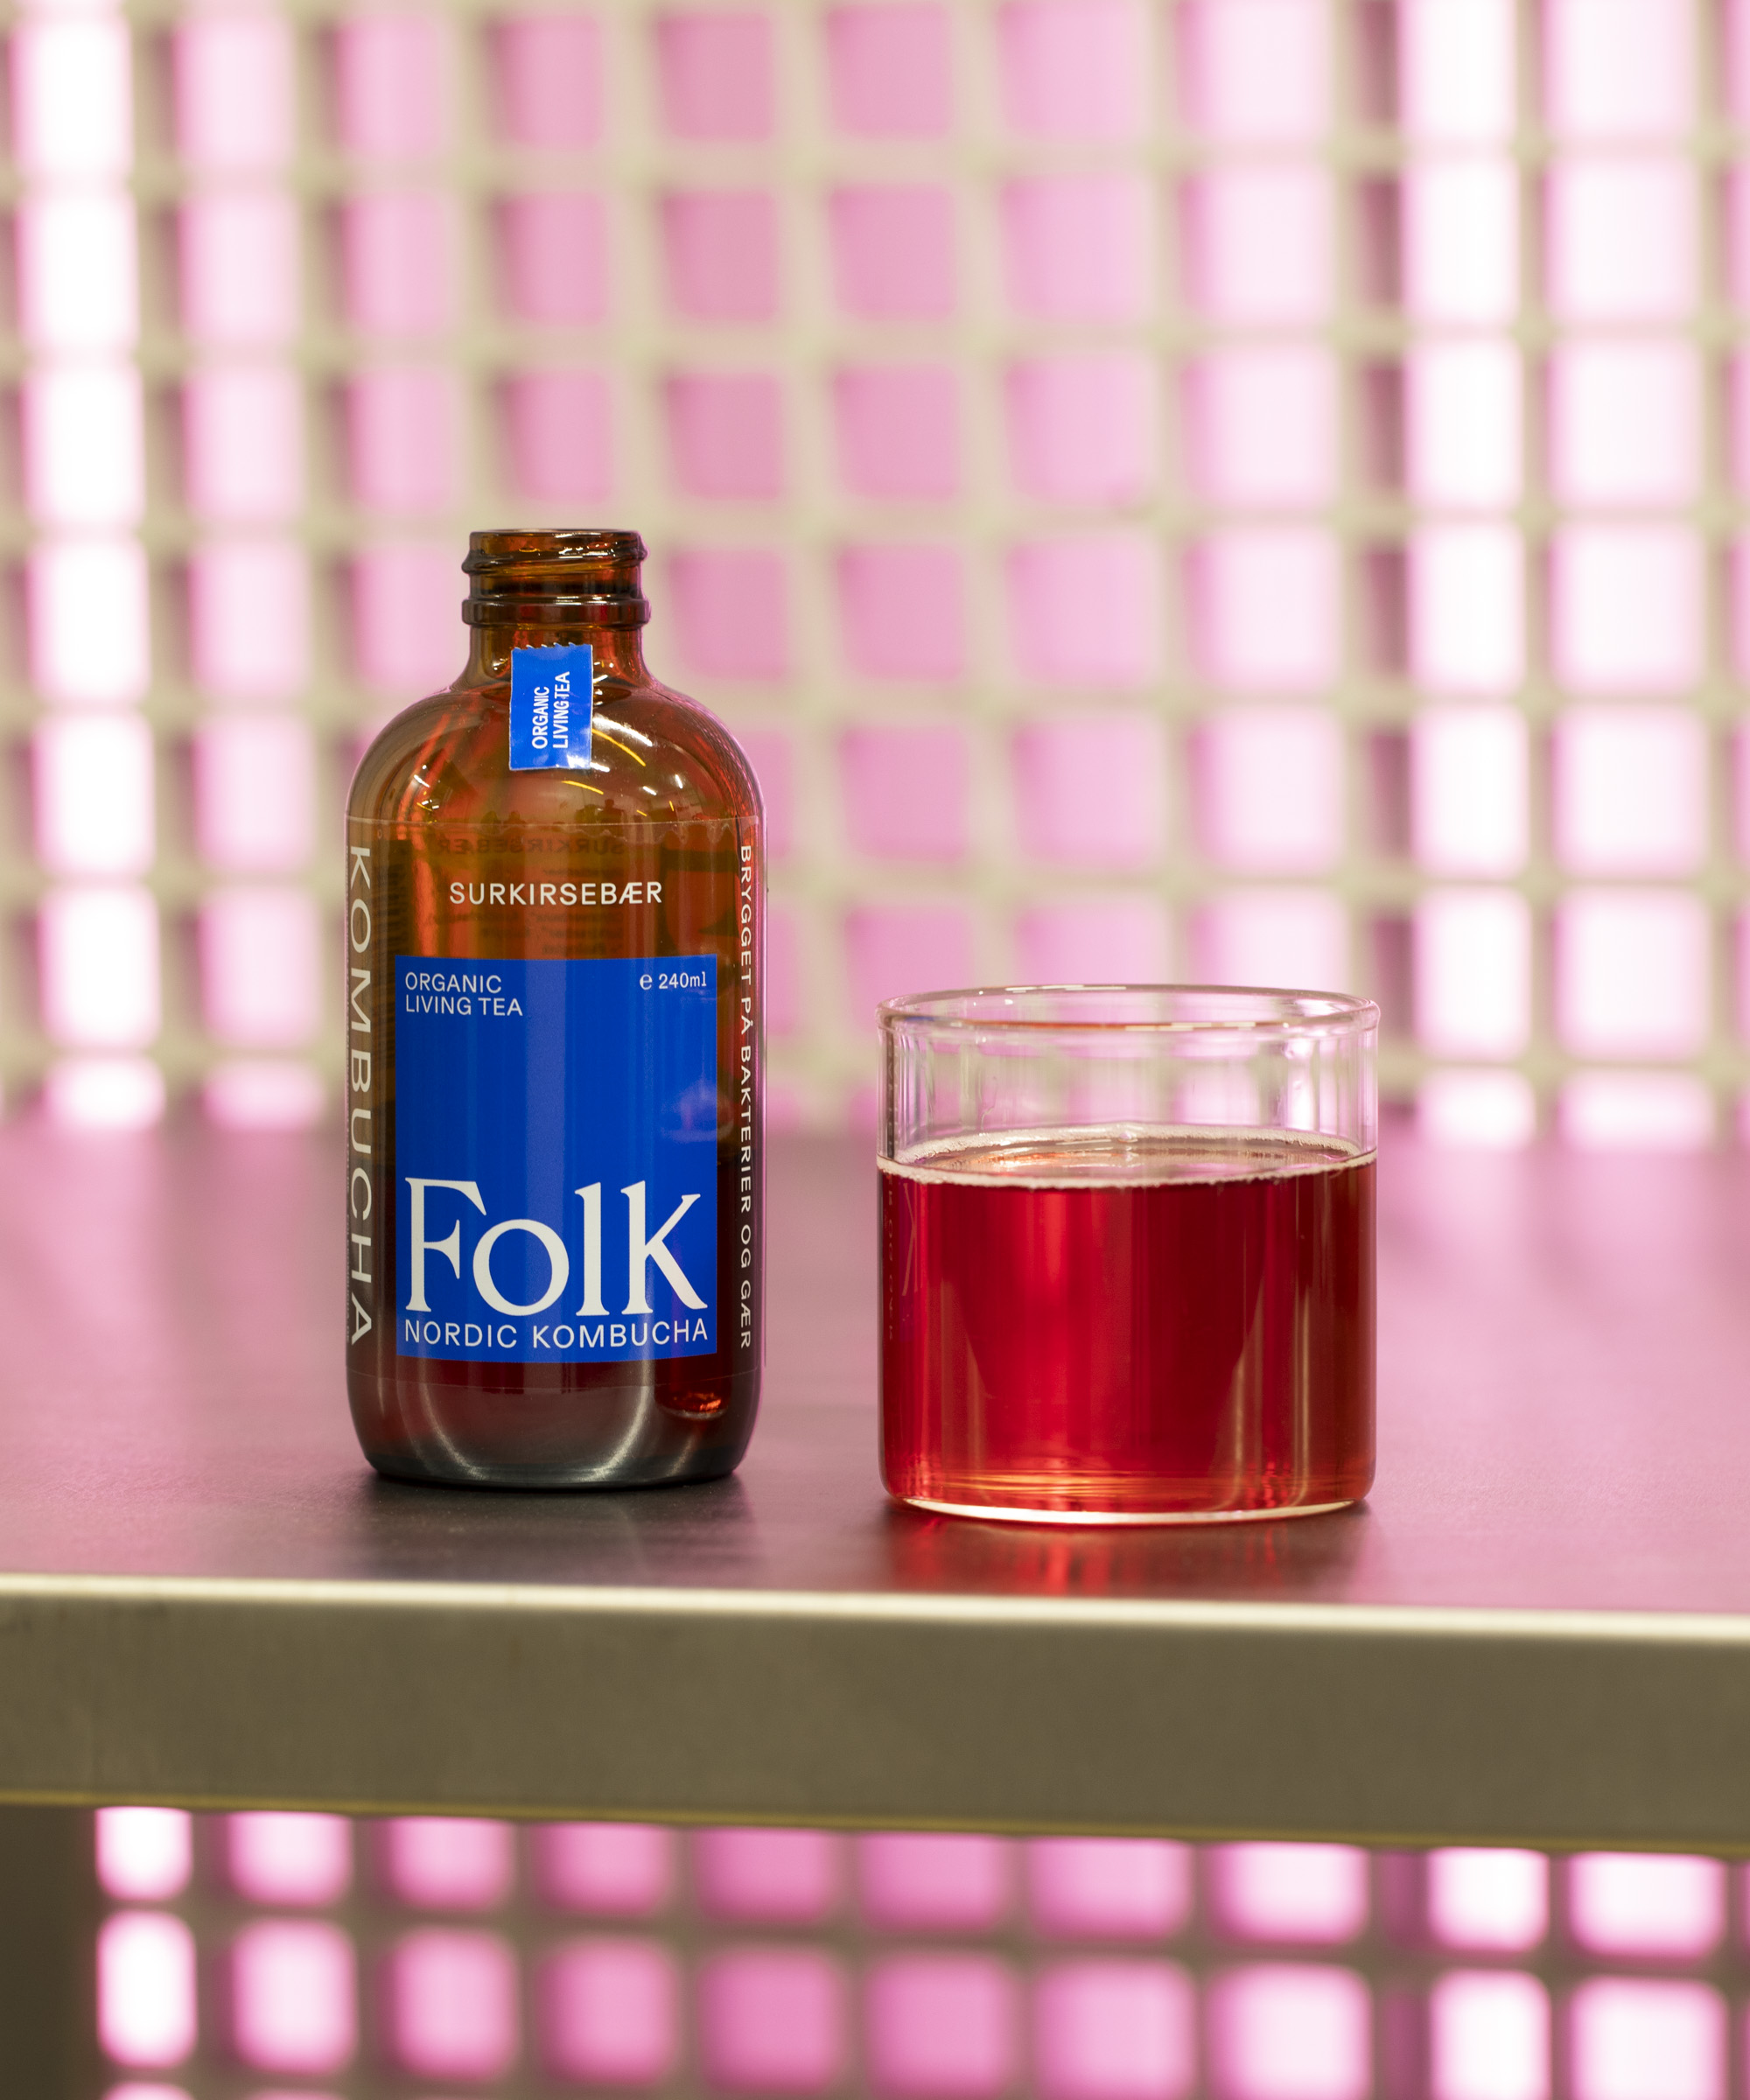 6 bottles of kombucha from Folk in Kødbyen – The Nordic kombucha that’s been declared an all-time favorite by David Zilber and British Vogue